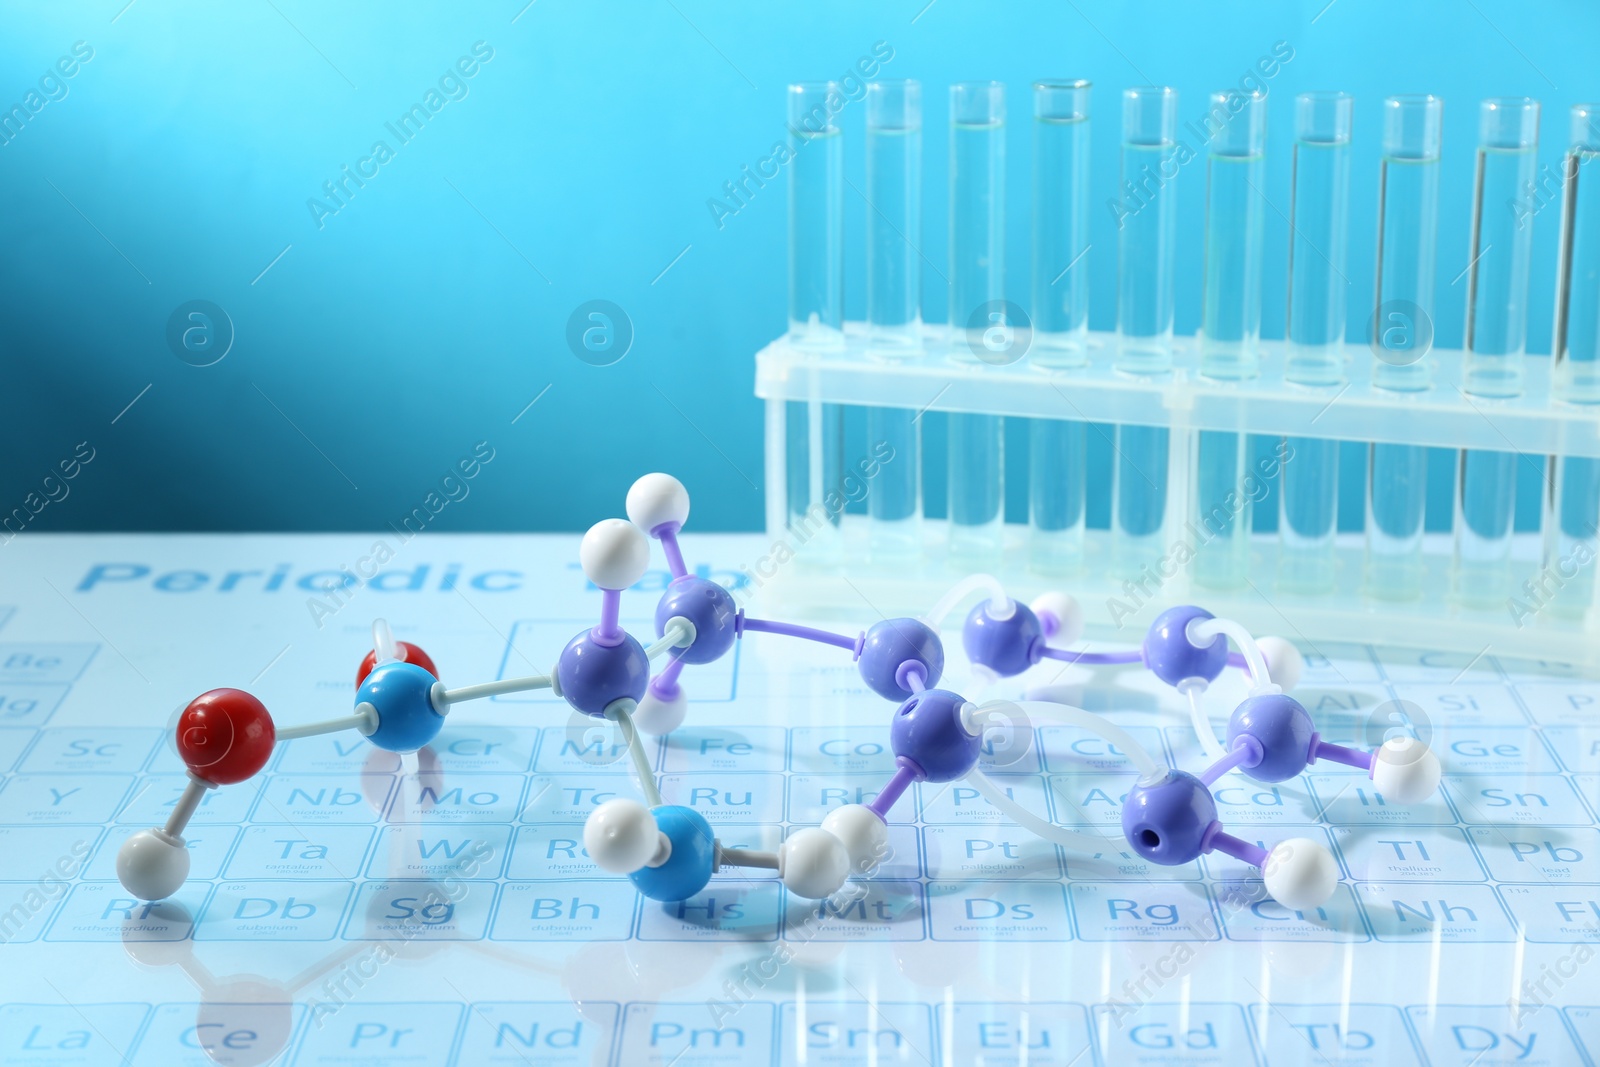 Photo of Molecular model and test tubes on periodic table against light blue background